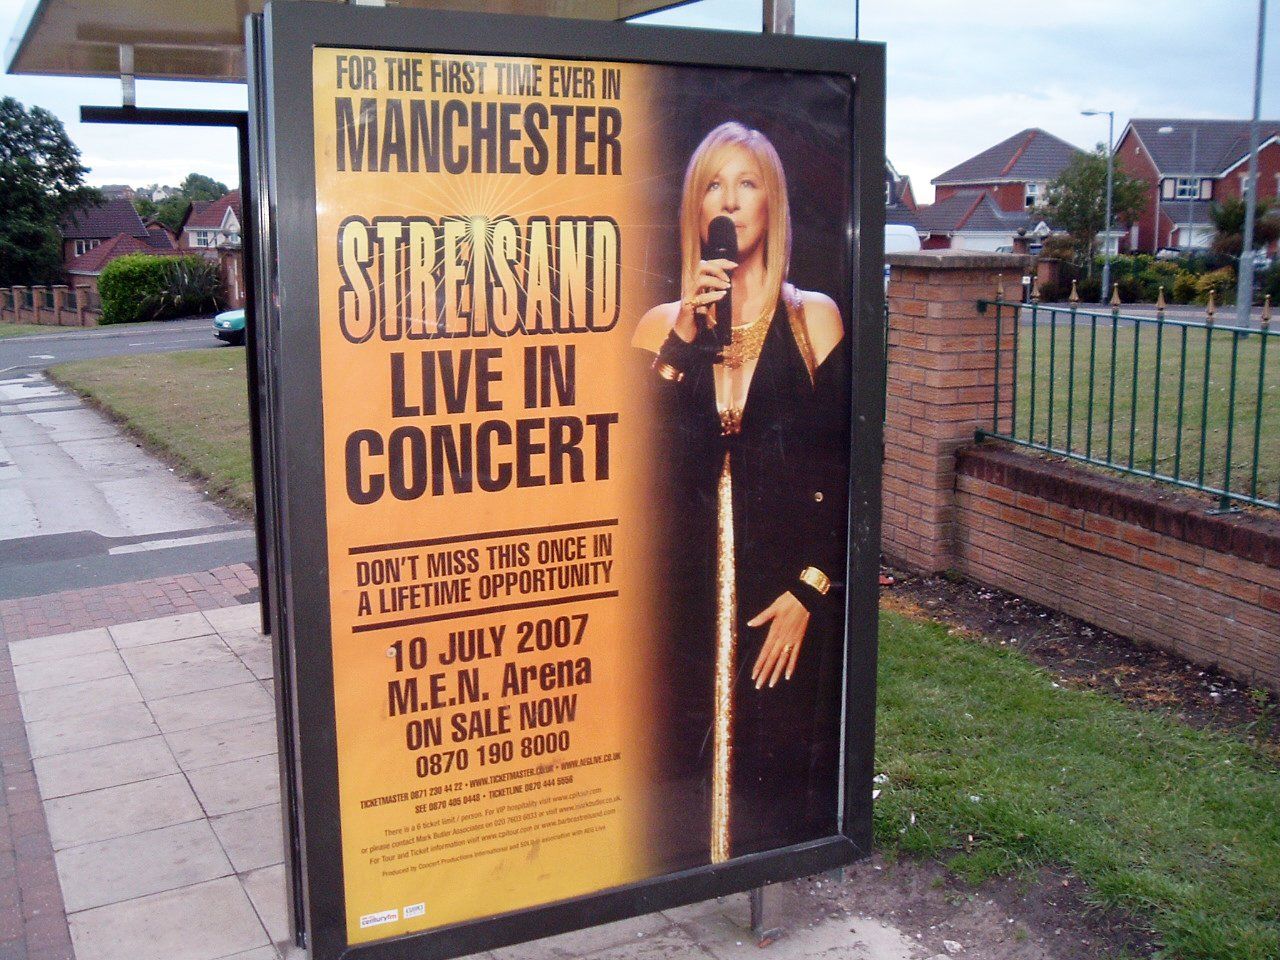 A poster for Streisand's Manchester show at a local bus stop.   Photo courtesey of Nathan